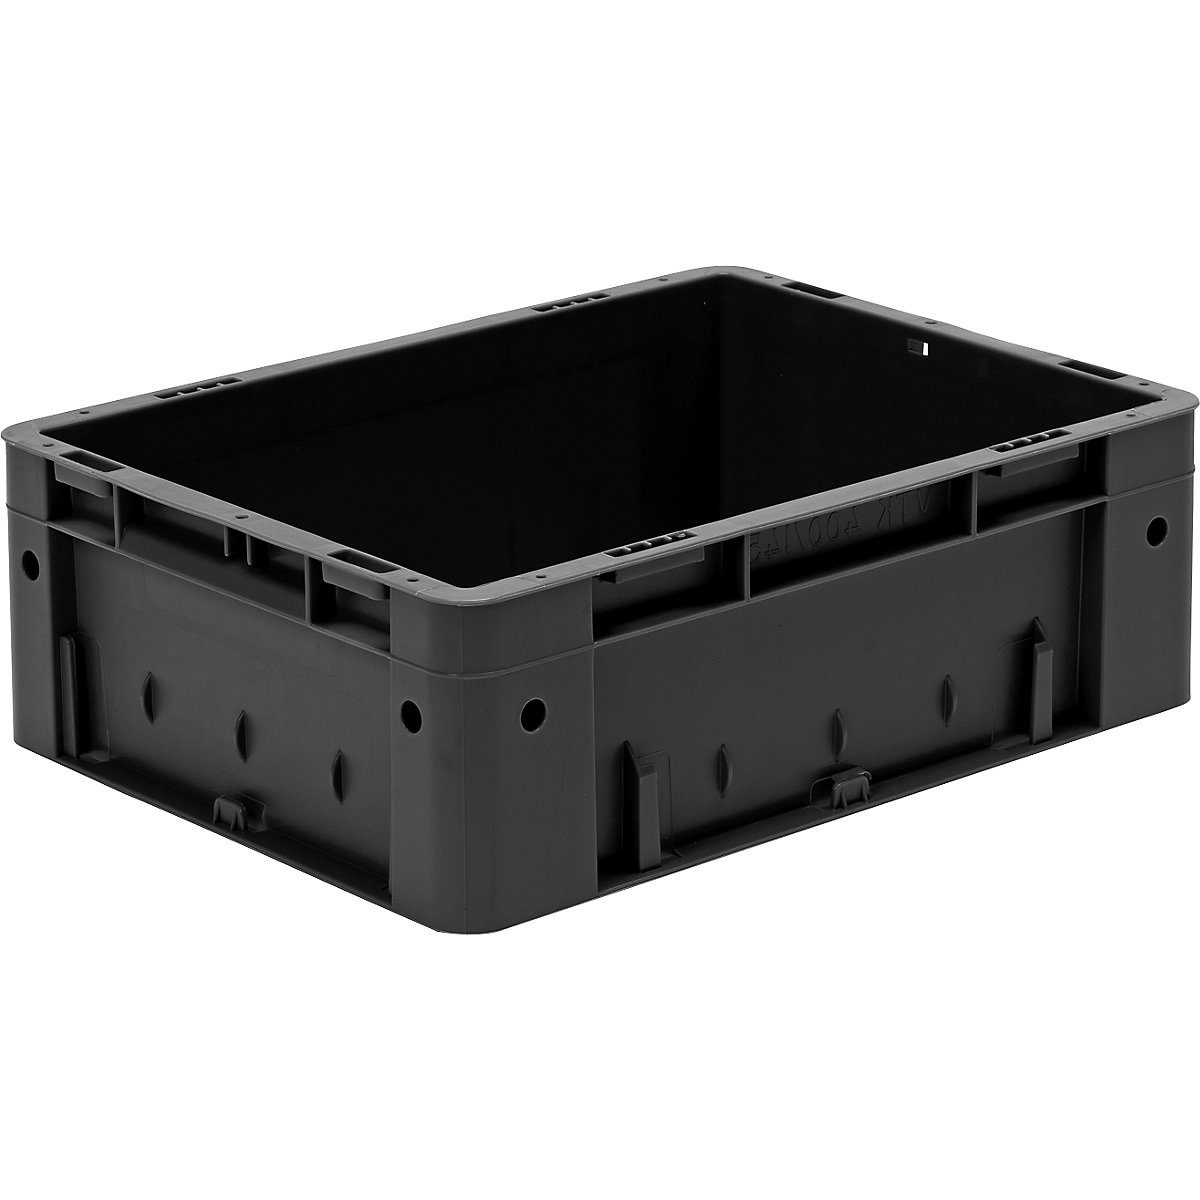 ESD heavy duty EURO-size container, made of polypropylene, LxWxH 400 x 300 x 145 mm, pack of 4-5